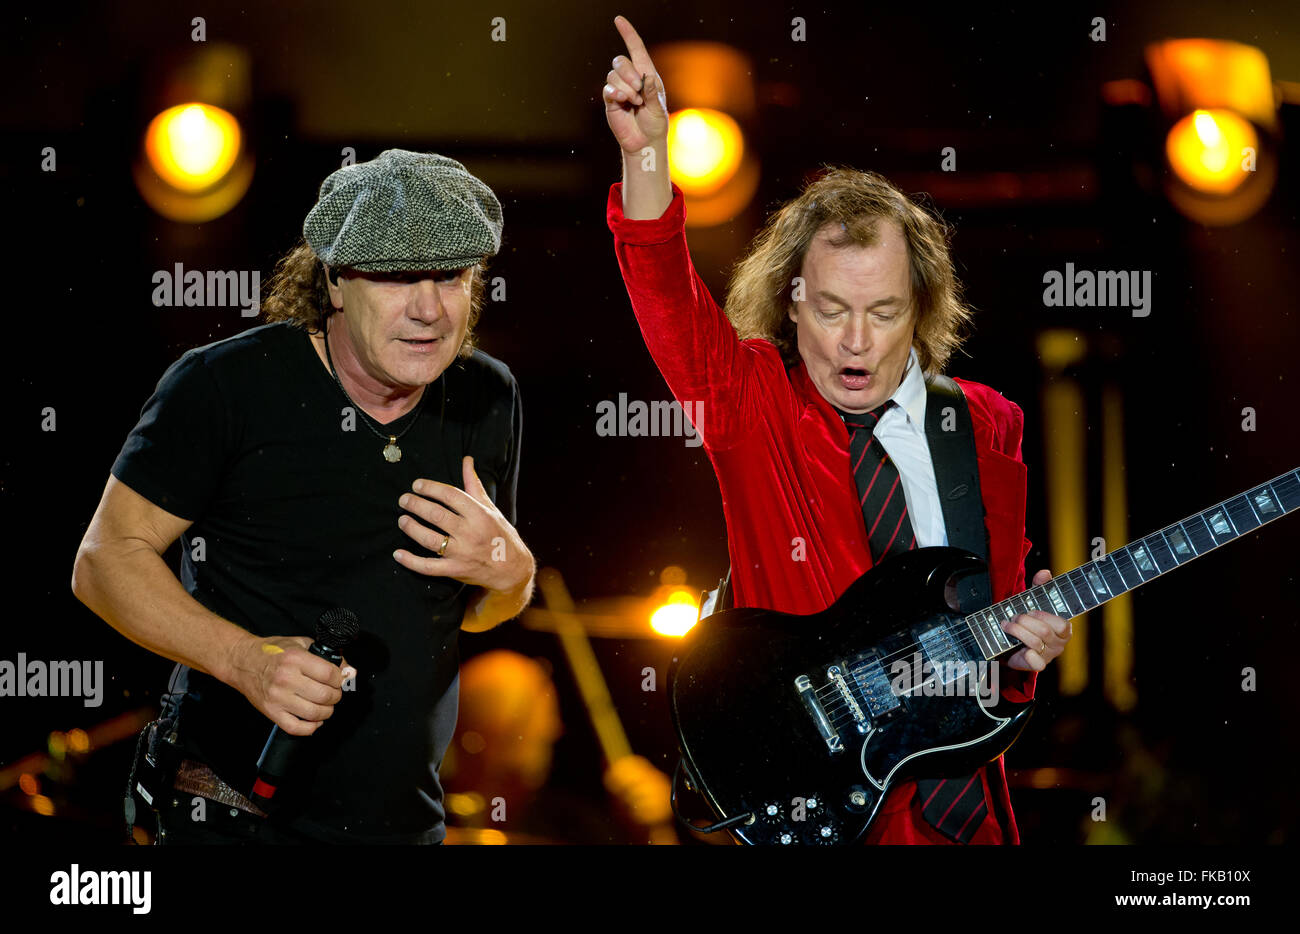 Slagskib buste Sodavand Munich, Germany. 19th May, 2015. The singer, Brian Johnson (L), and the  guitarist, Angus Young, in the Australian rock band AC/DC stand on stage in  the Olympic Stadium in Munich, Germany, 19